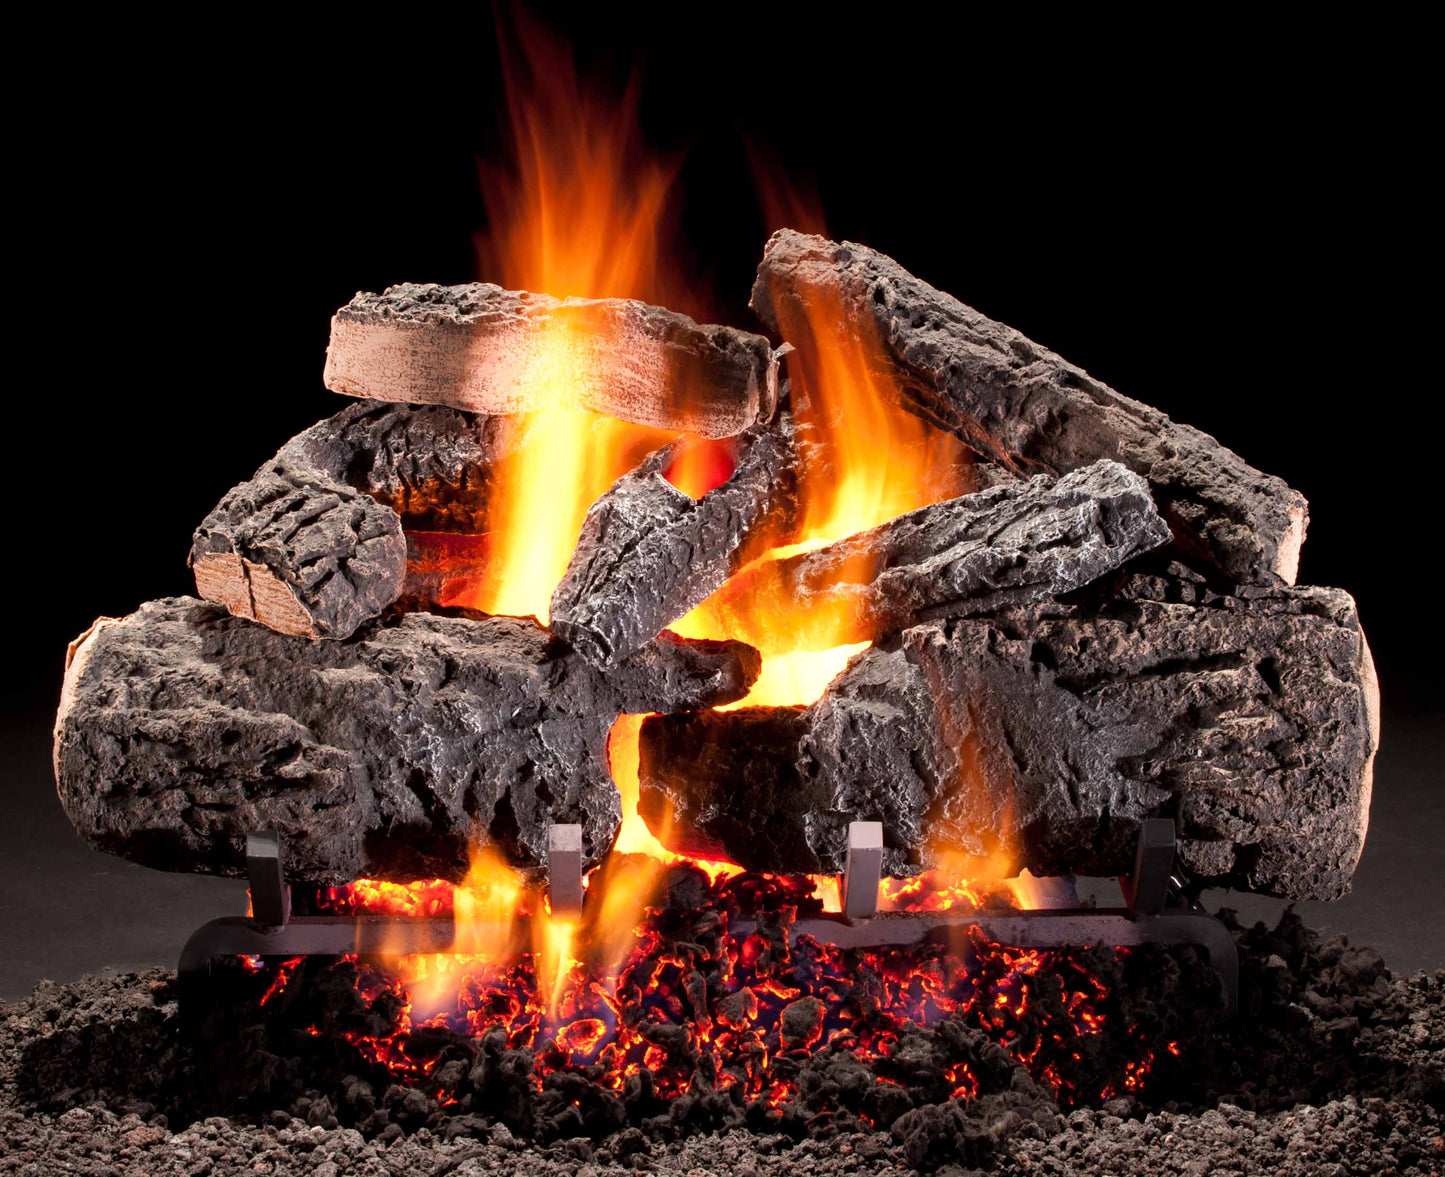 Hargrove 21 Inch Radiant Heat Series Vented Gas Log Set With Variable Flame Control - 18RNEB1F5